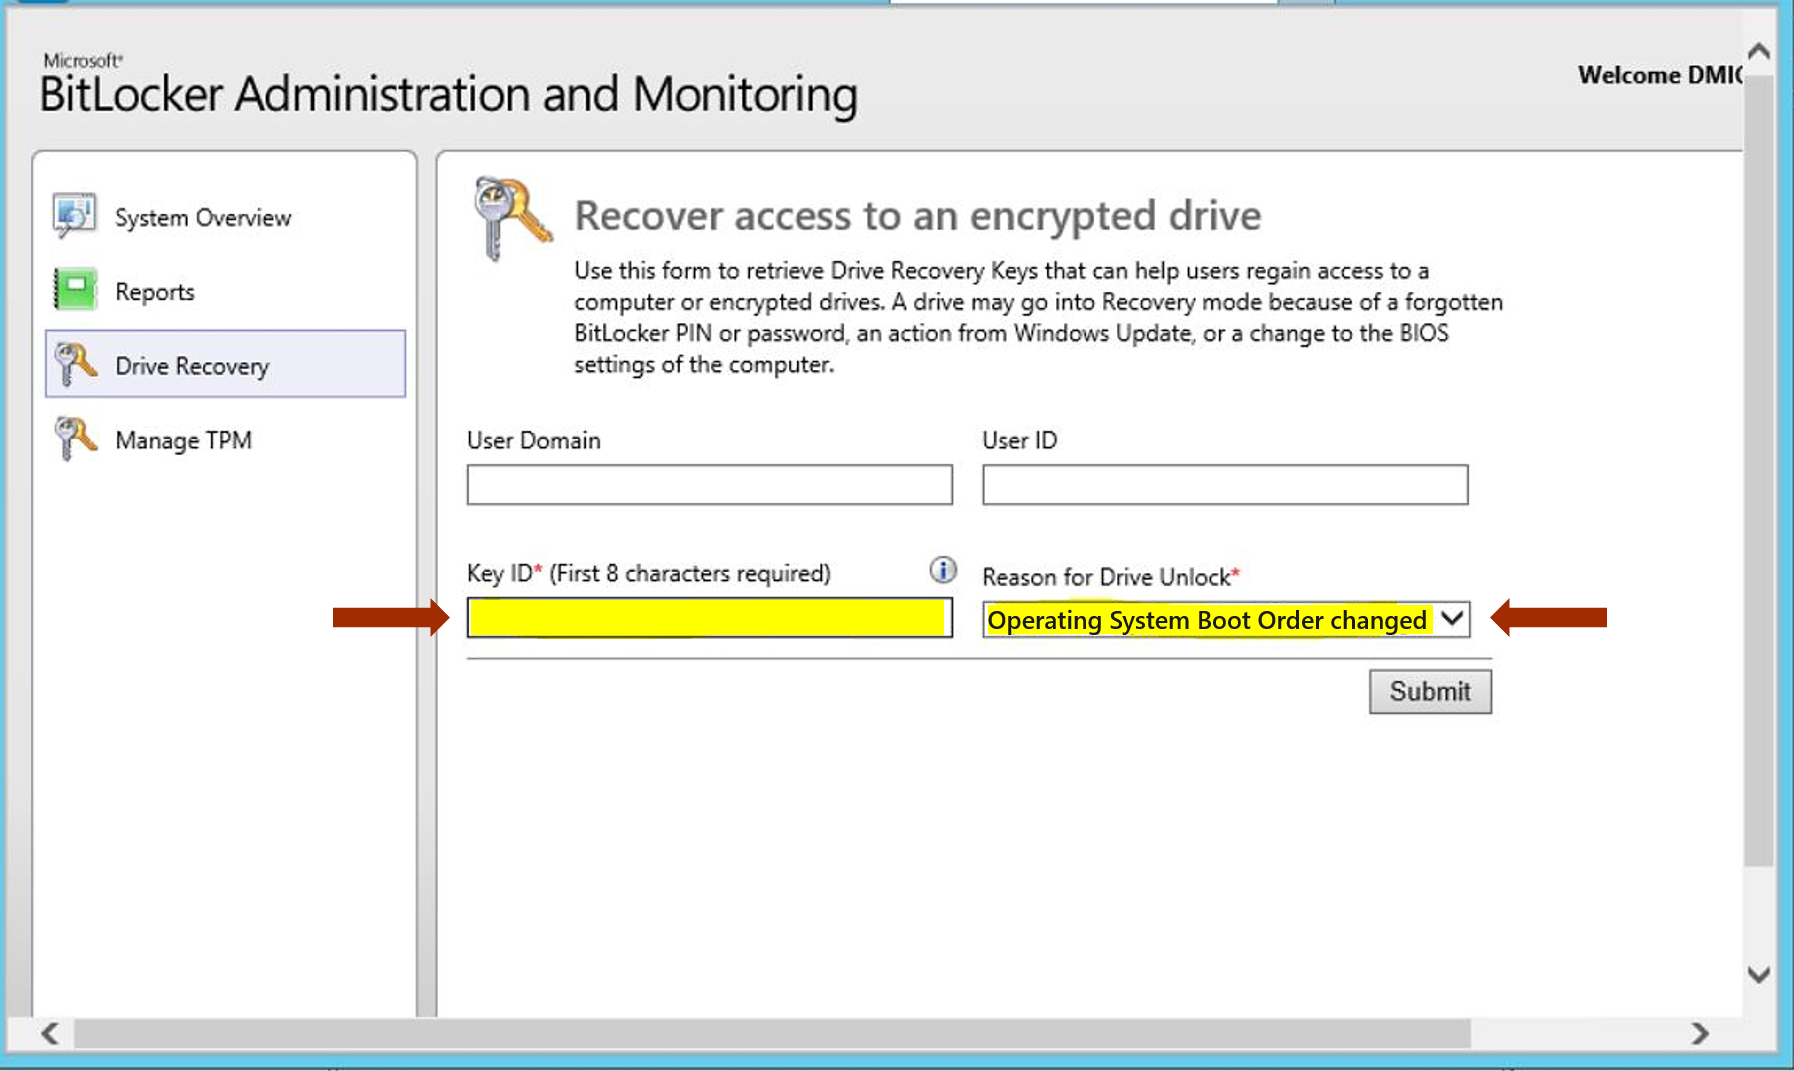 Screenshot of Microsoft MBAM prompting for the KeyID and reason for recovering access to an encrypted drive.